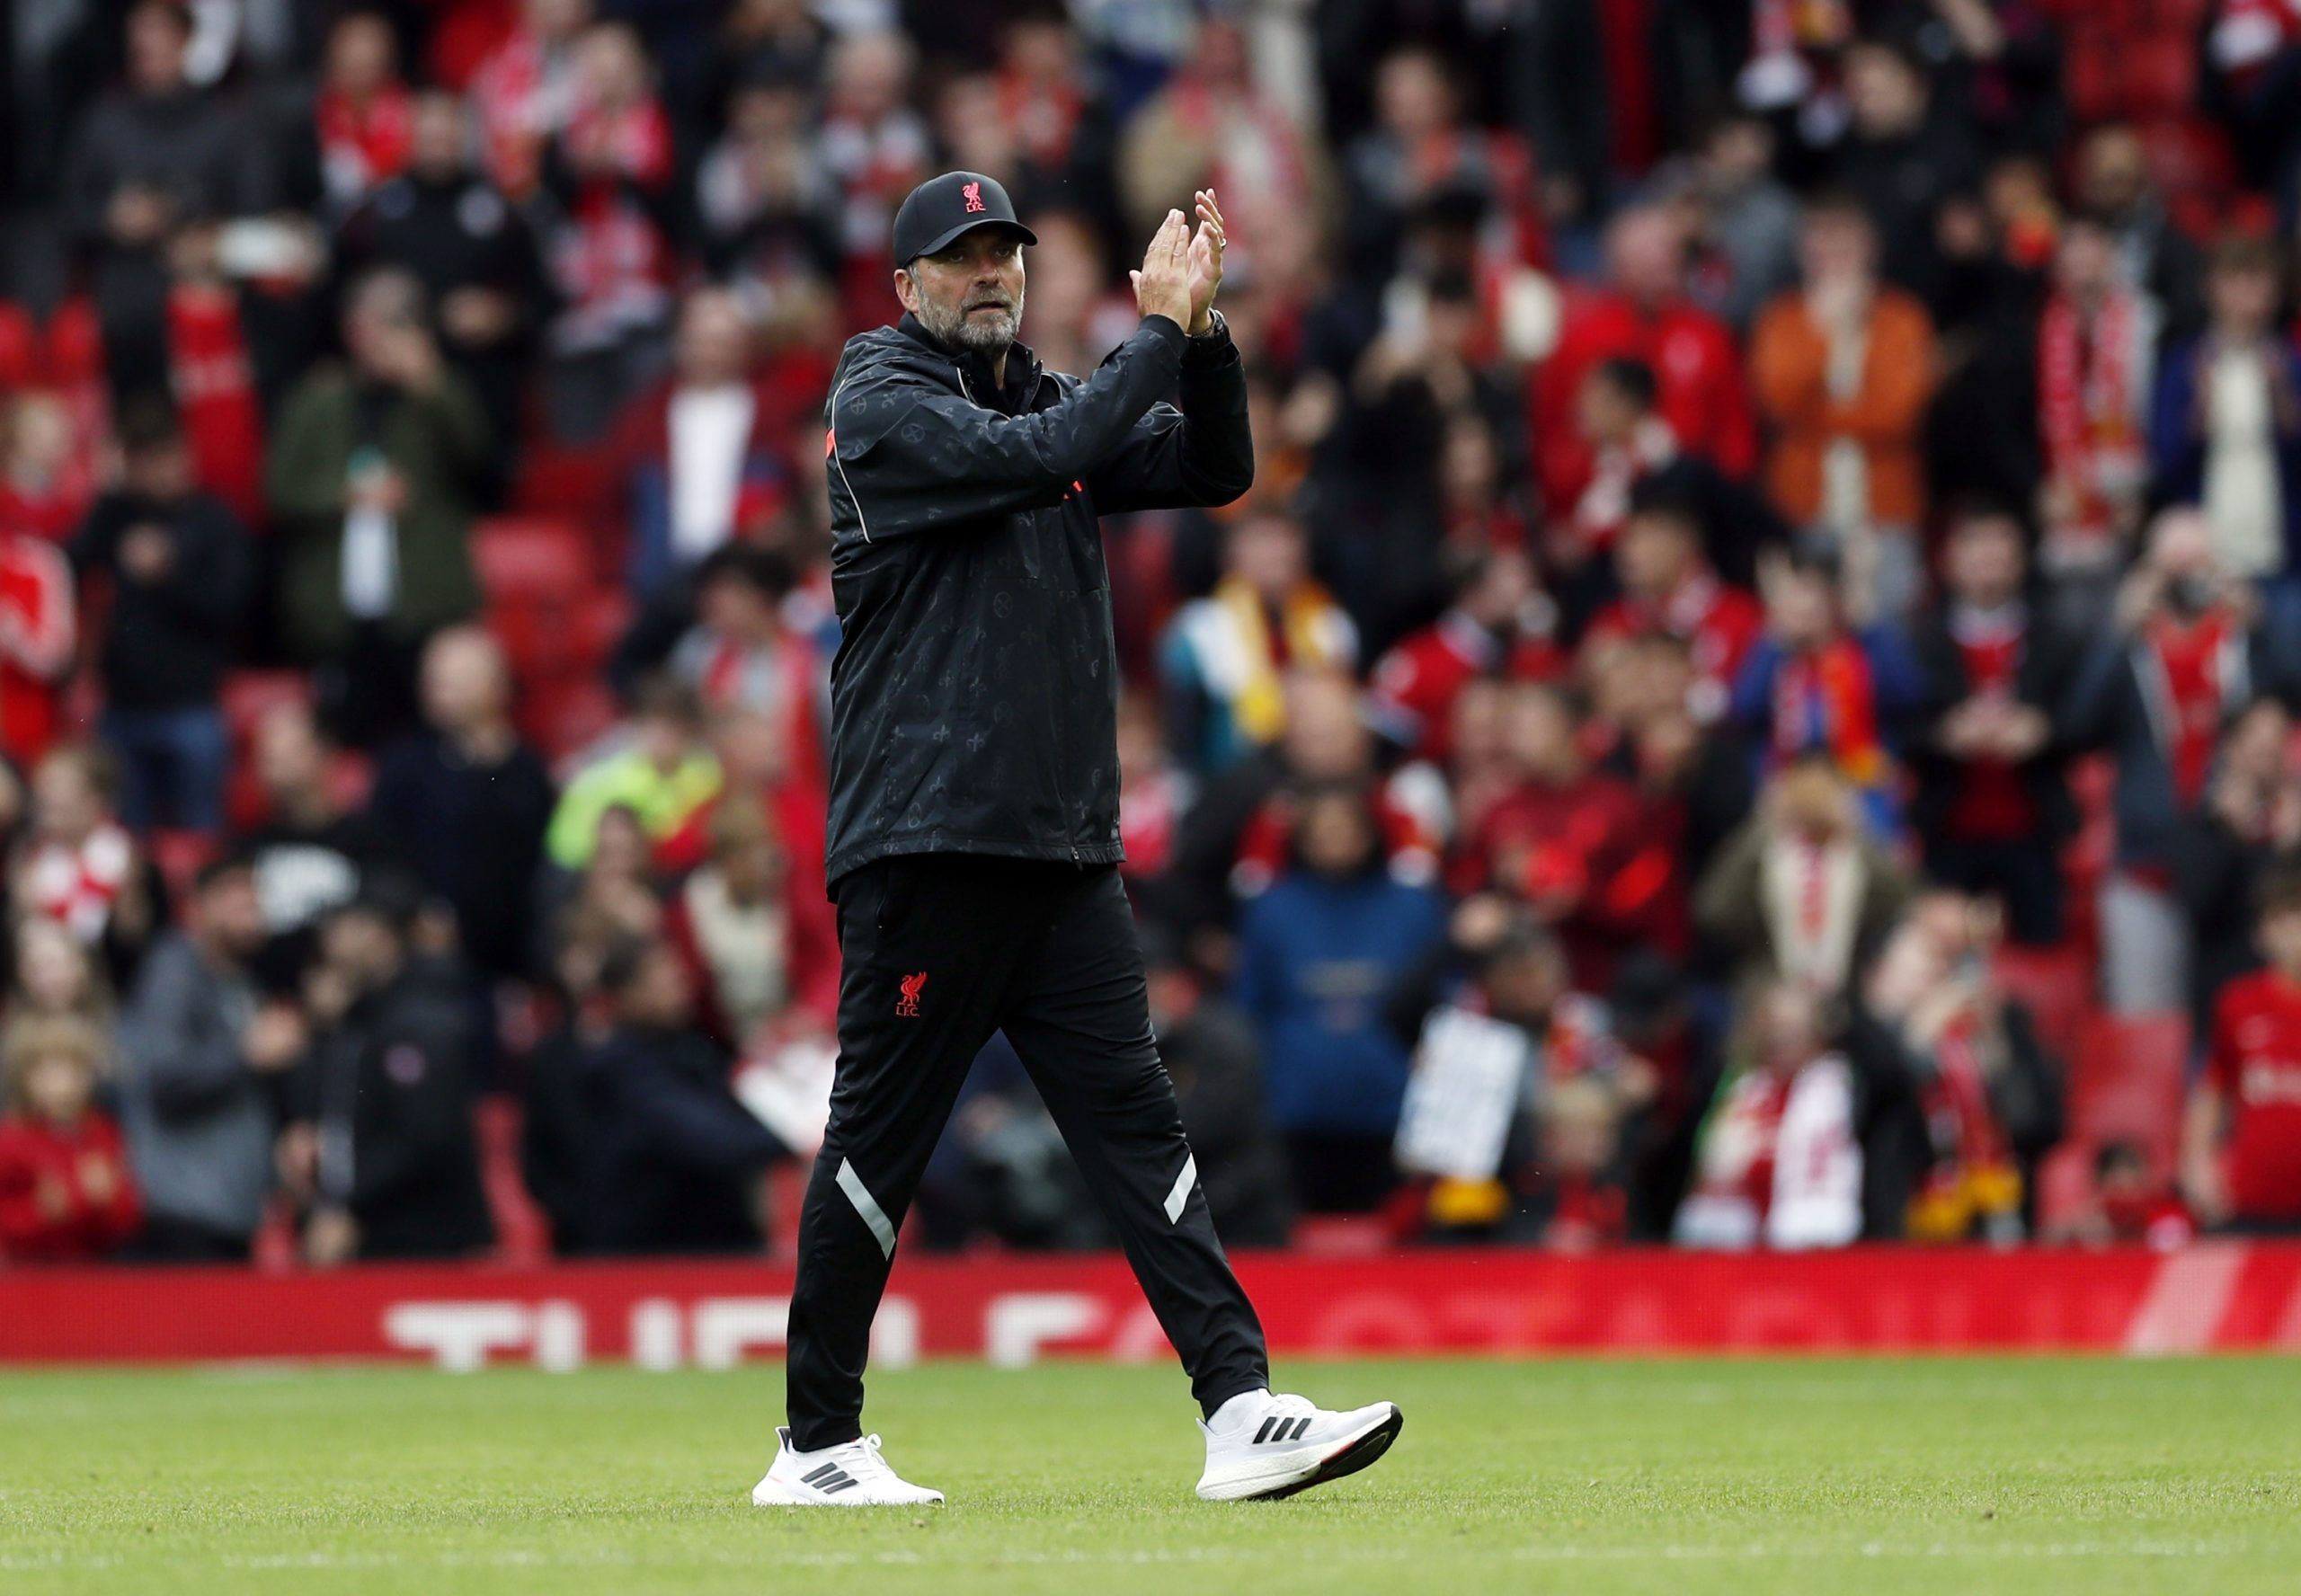 Soccer Football - Pre Season Friendly - Liverpool v Athletic Bilbao - Anfield, Liverpool, Britain - August 8, 2021  Liverpool manager Jurgen Klopp acknowledges the fans after the match Action Images via Reuters/Lee Smith